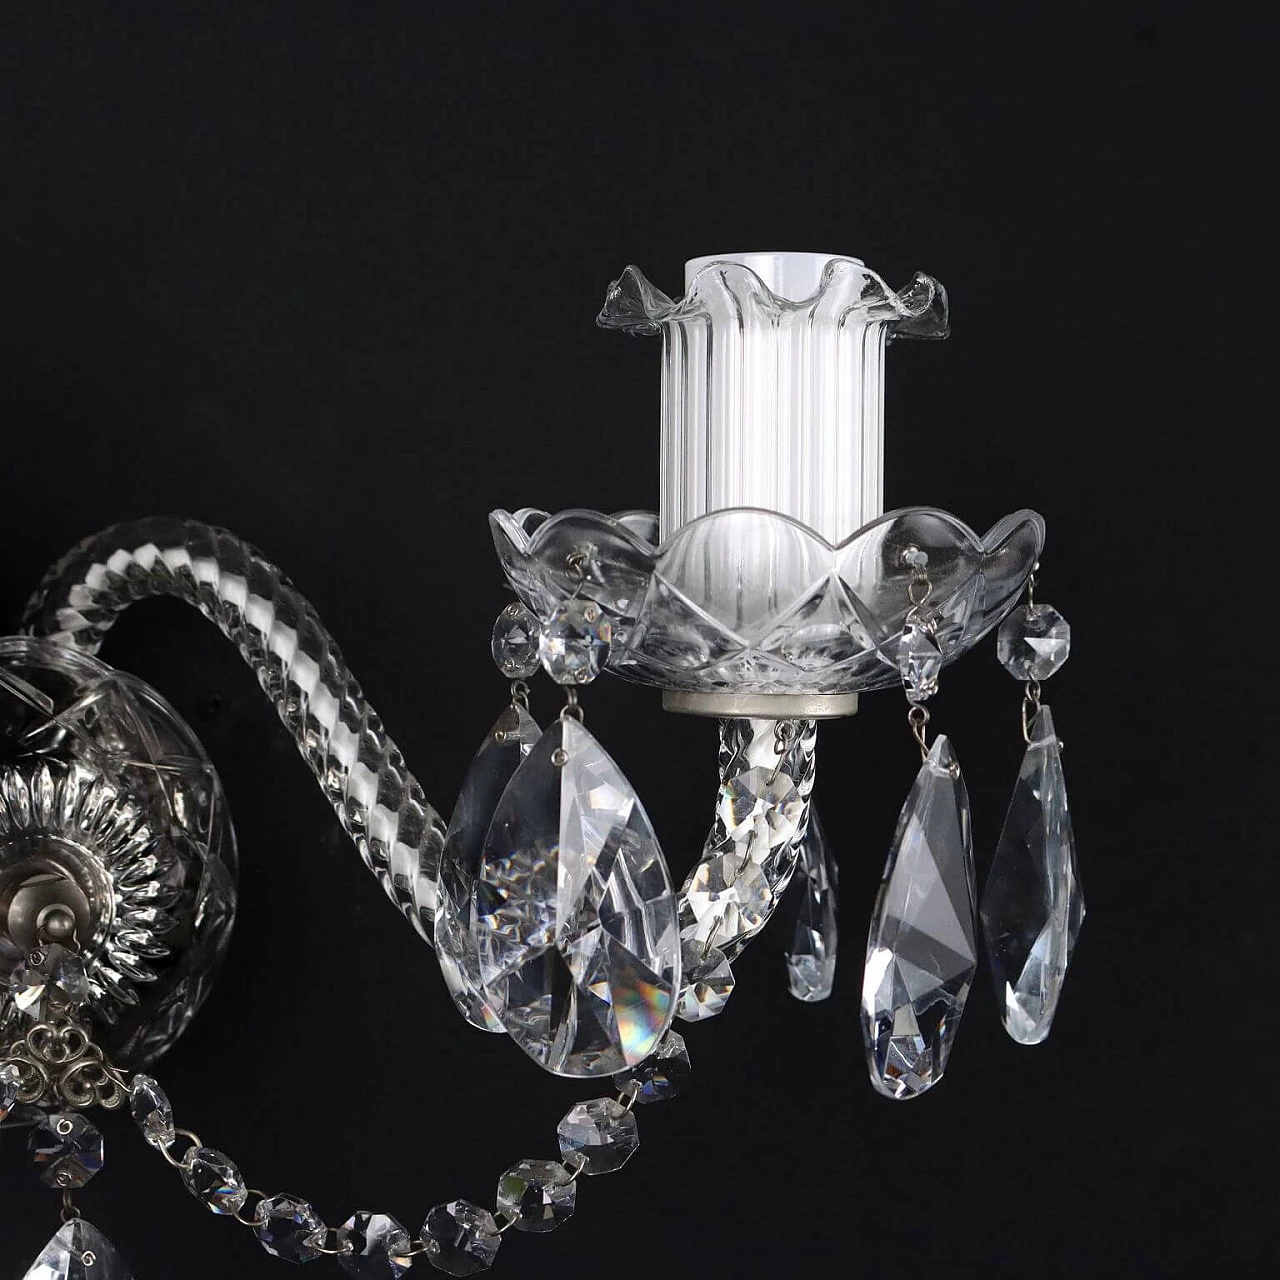 Two-light wall sconce with crystal arms, bobeches and pendants 3